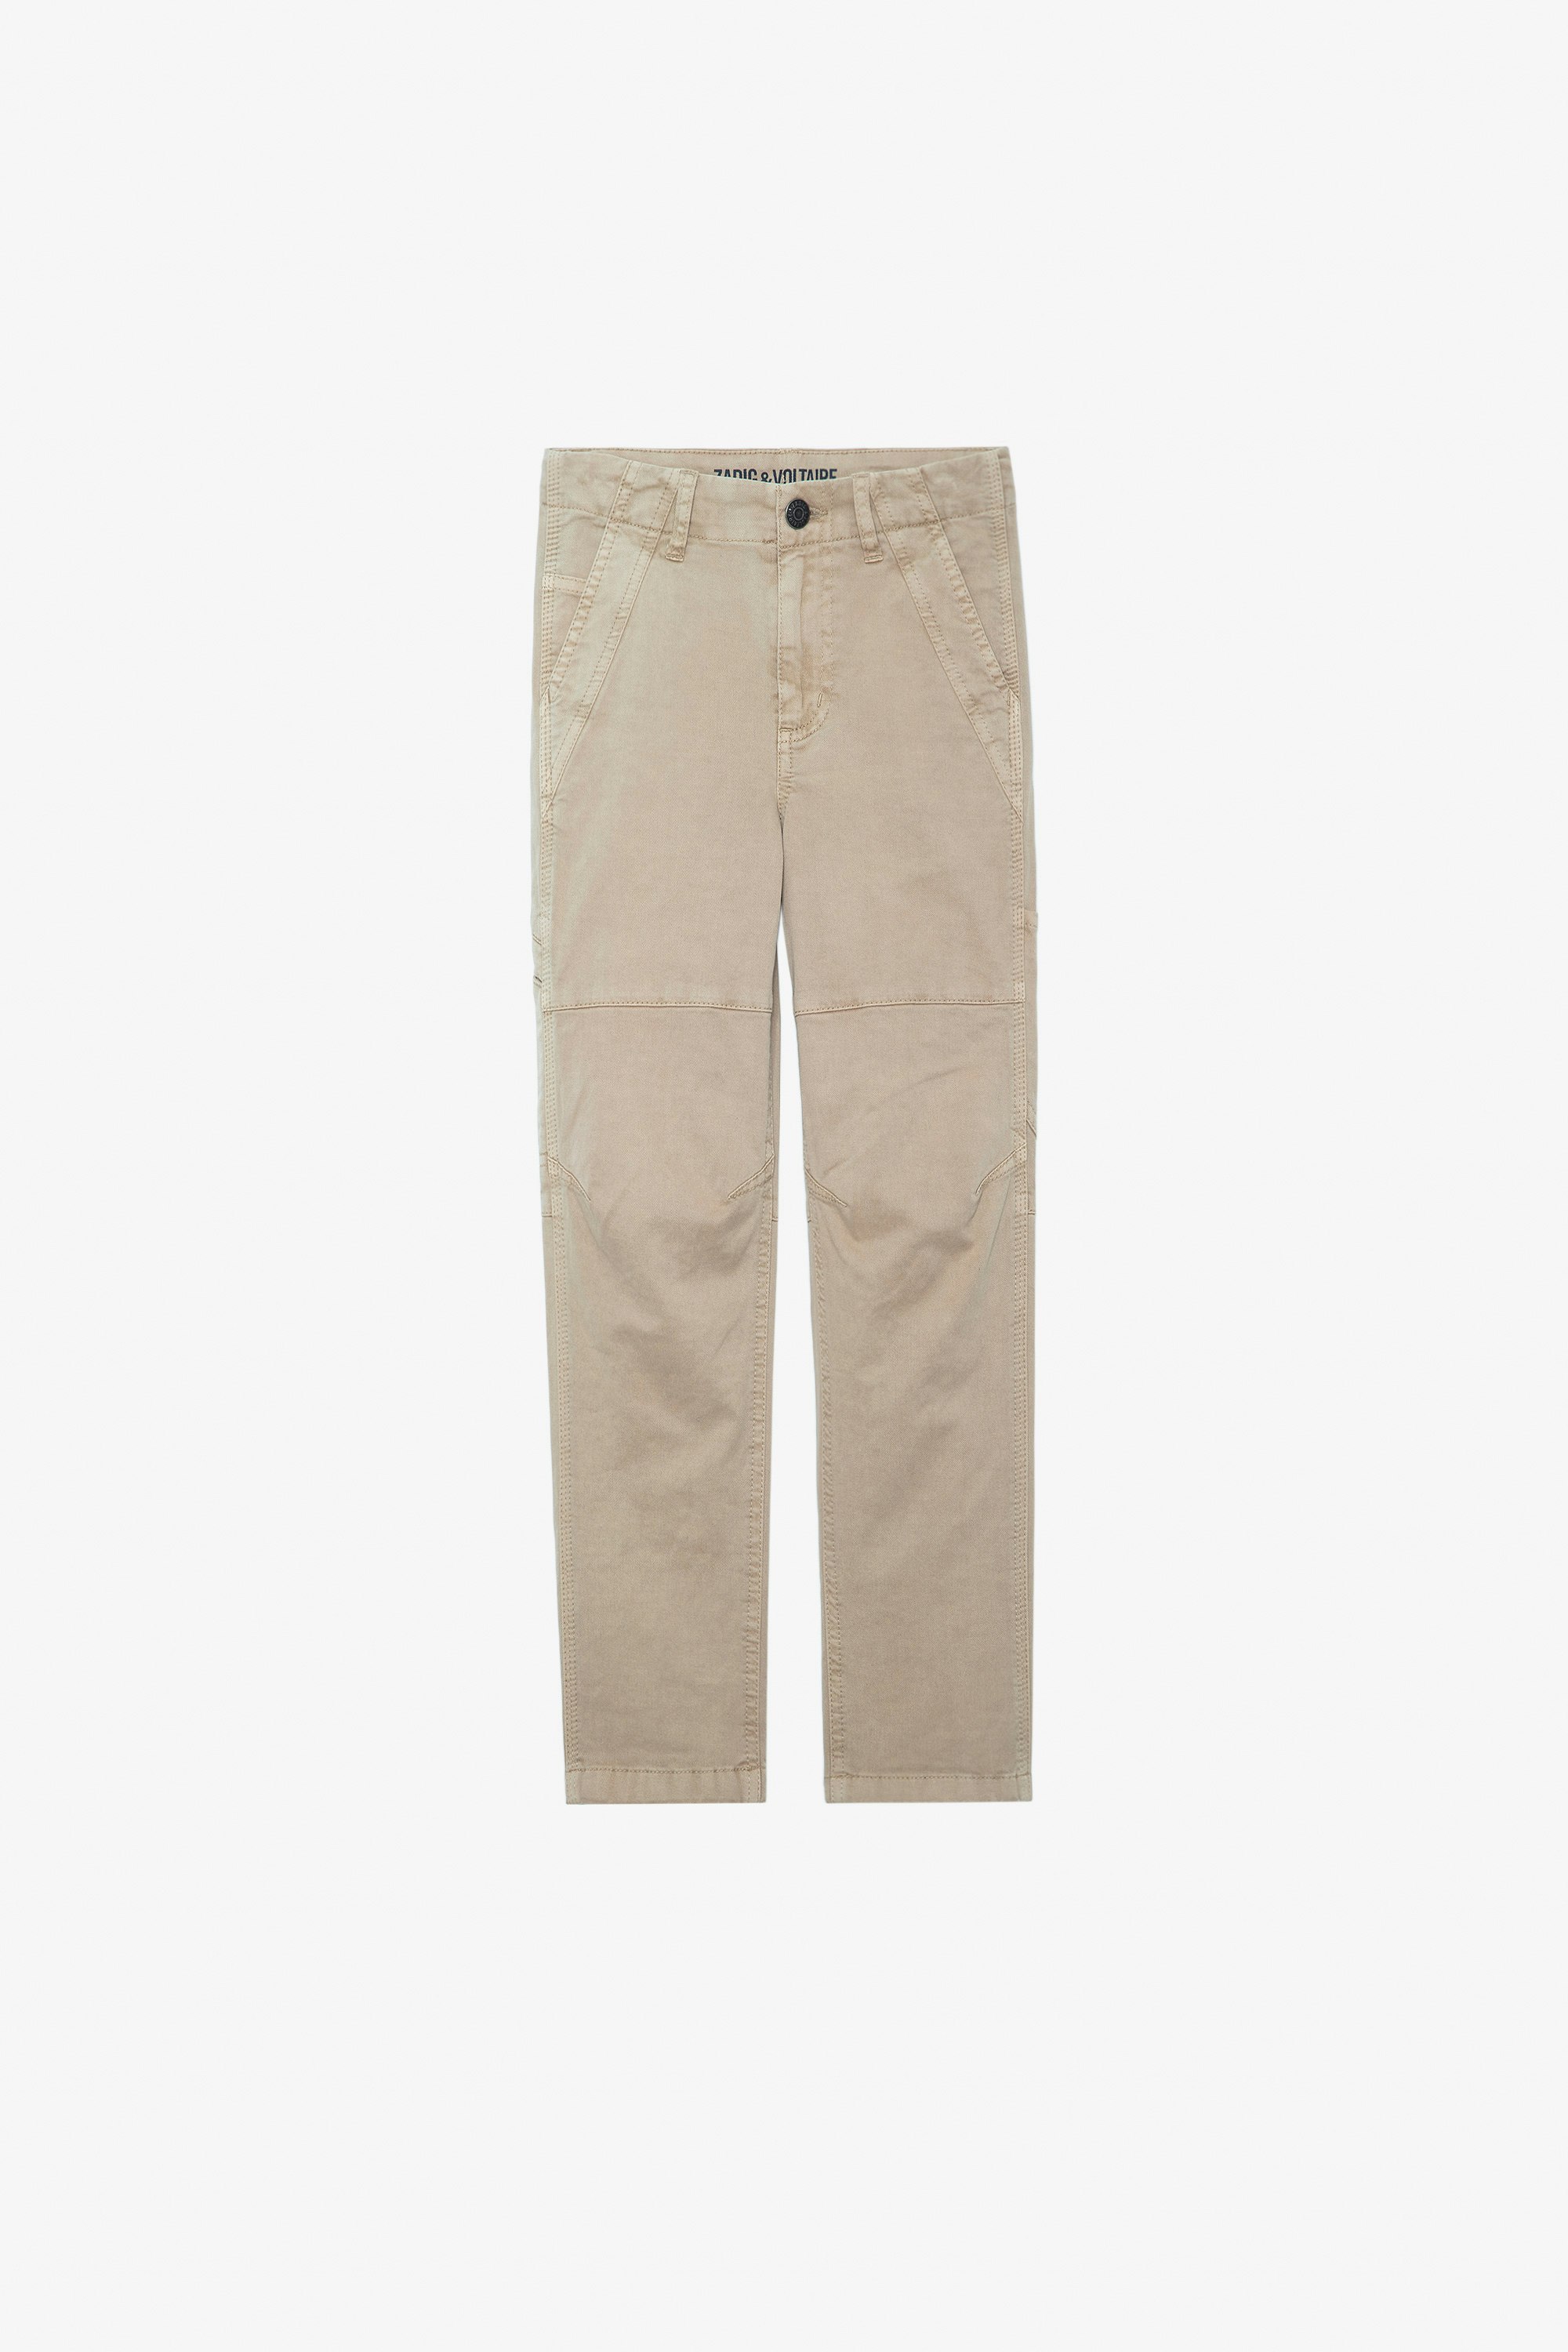 Theo Boys' Pants - Boys' cargo pants with back pocket patch.